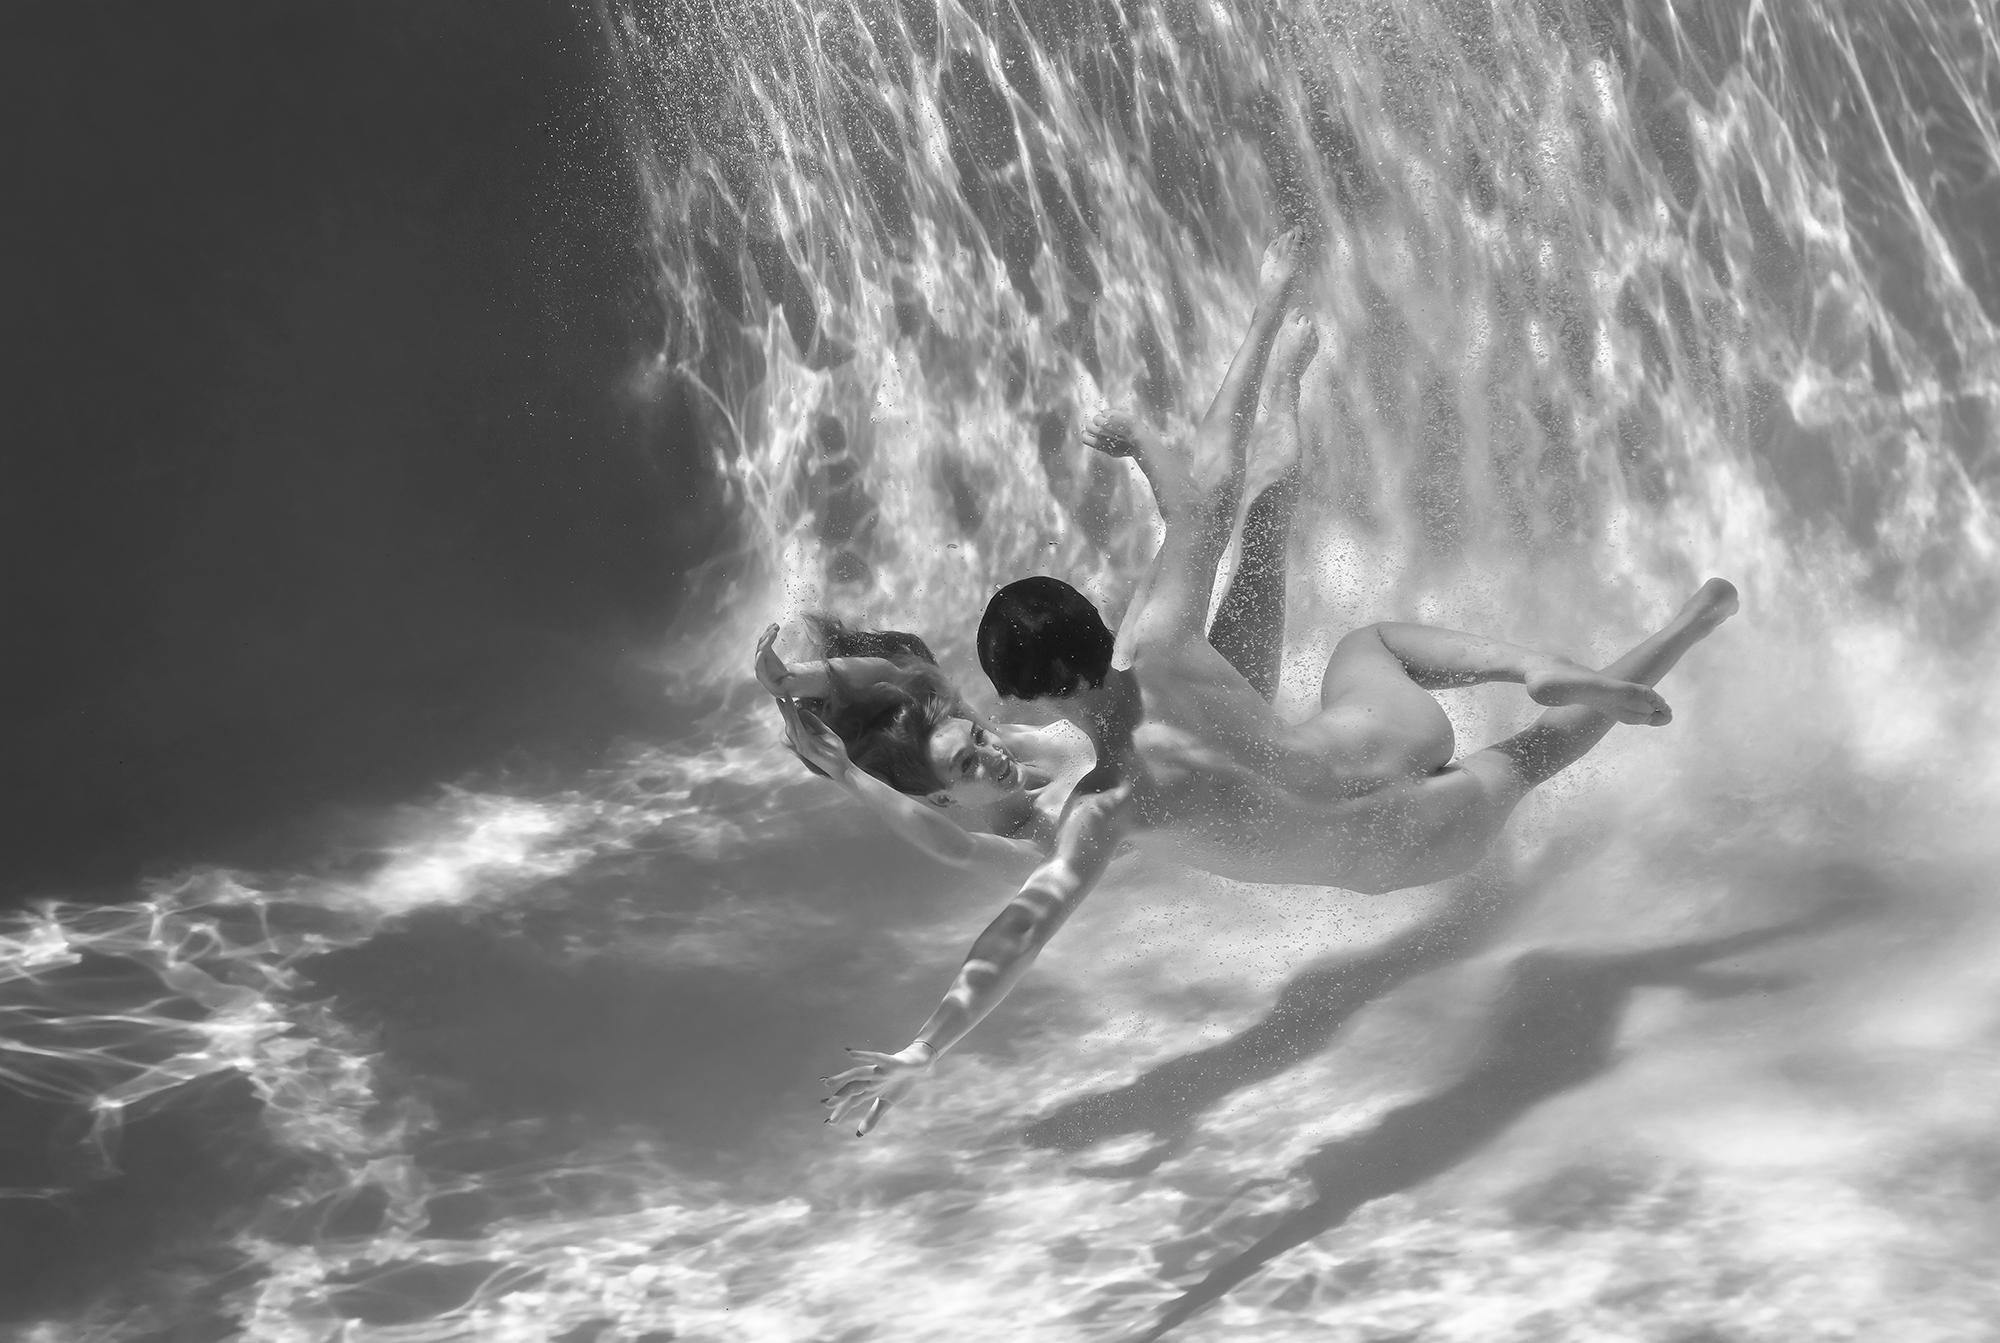 Alex Sher - Pool Party VII - underwater black and white photograph